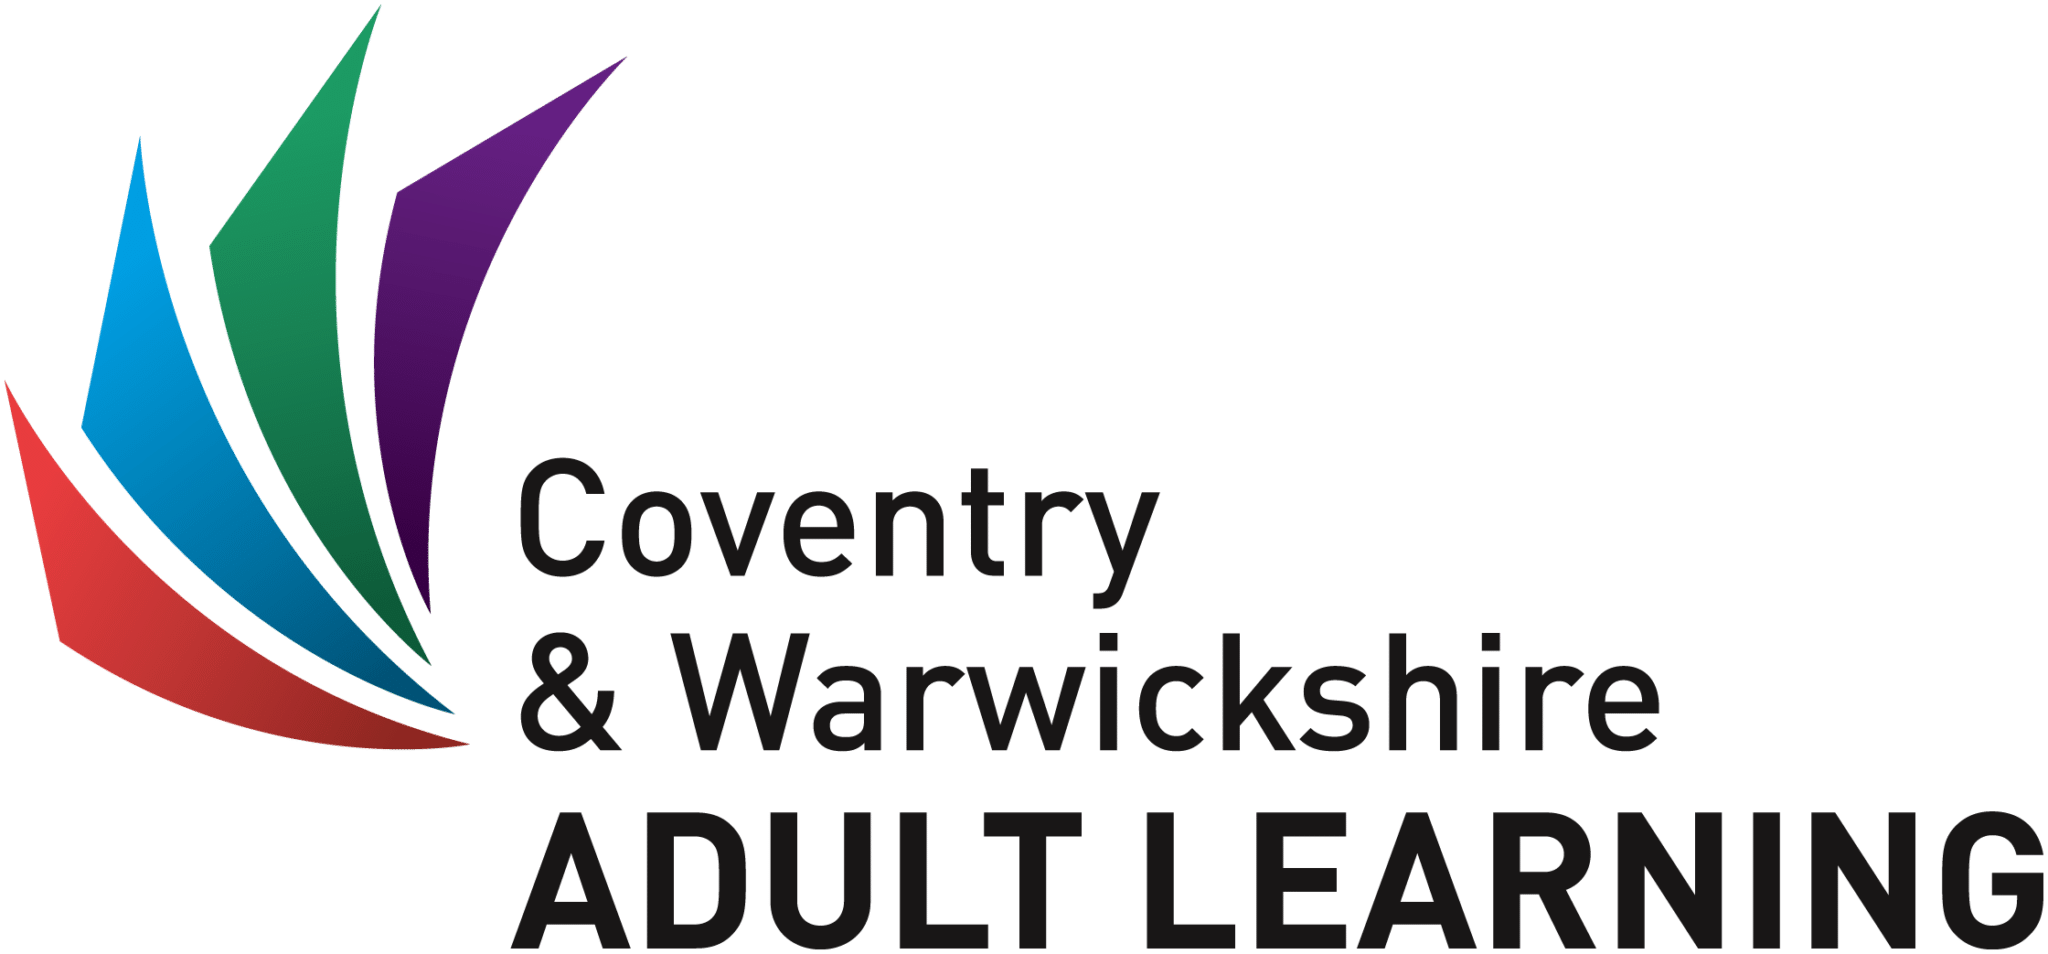 Coventry & Warwickshire Adult Learning